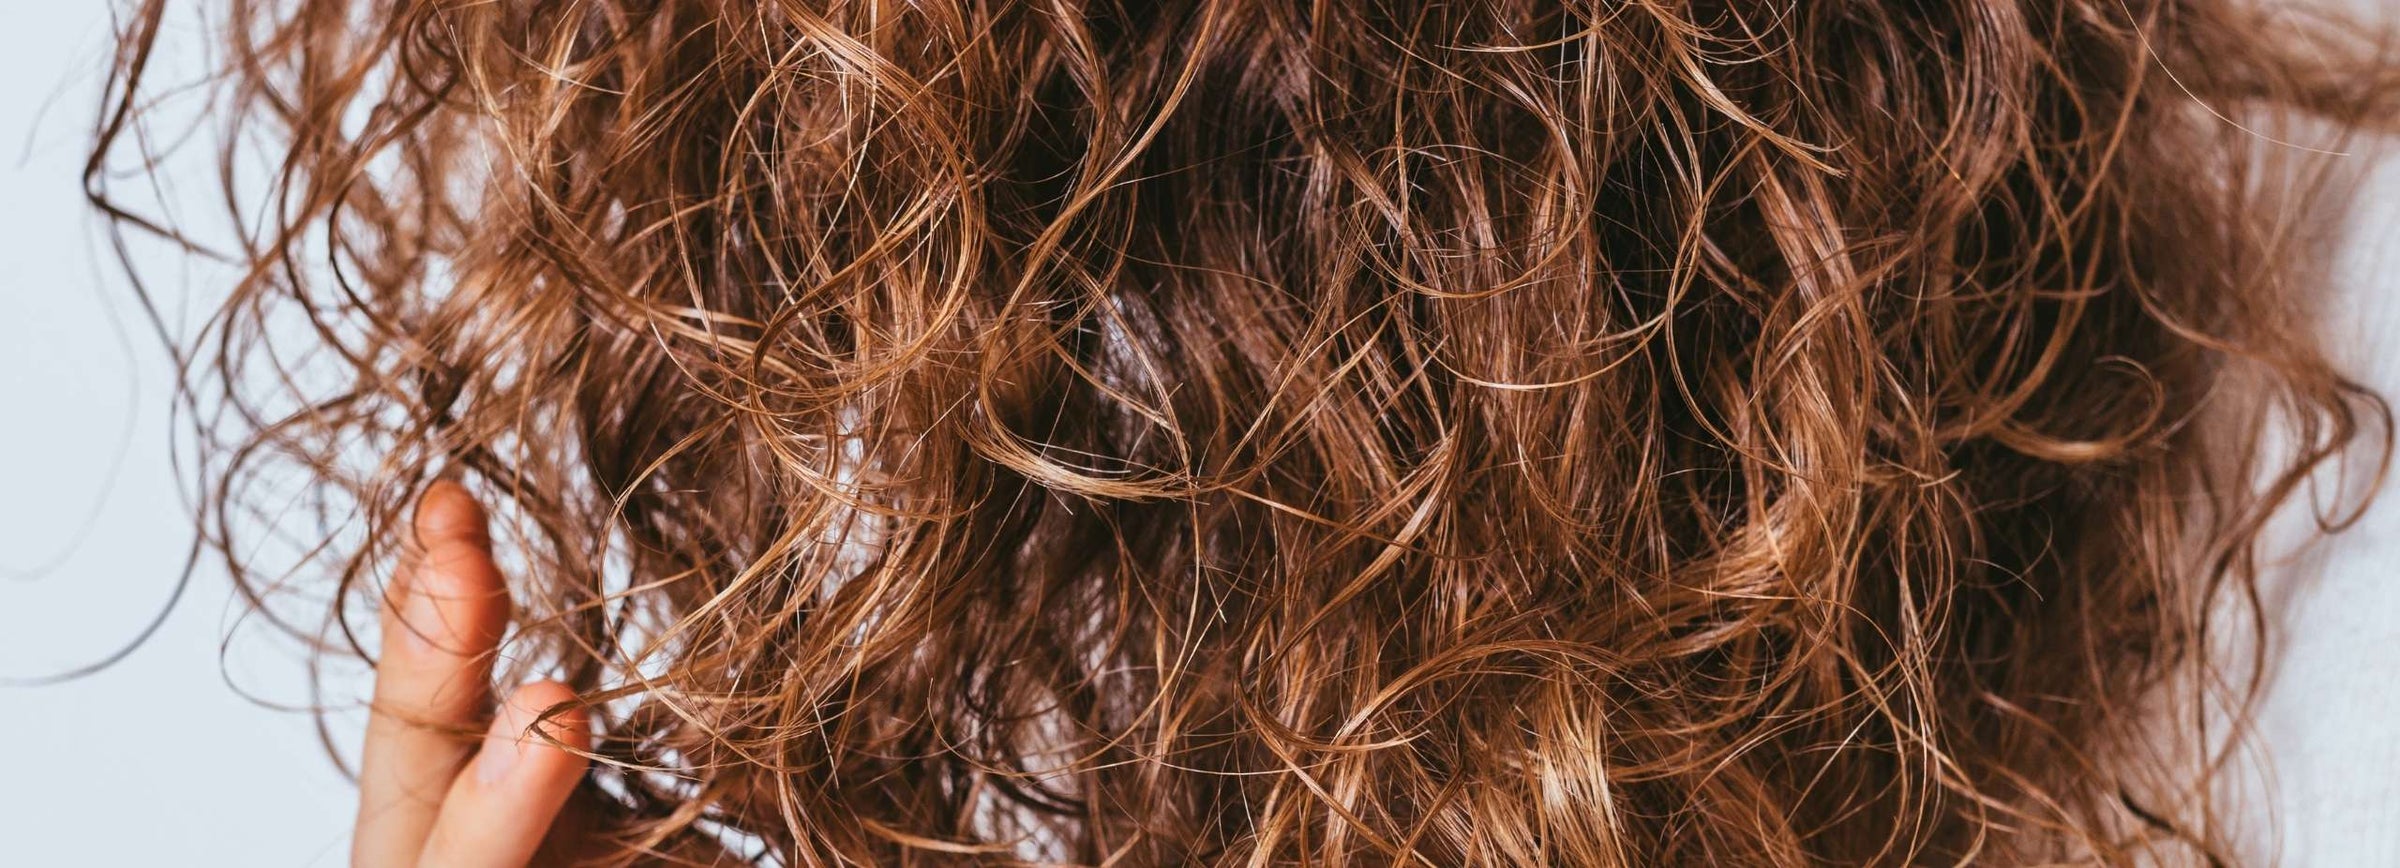 Hair care products for very dry or curly hair